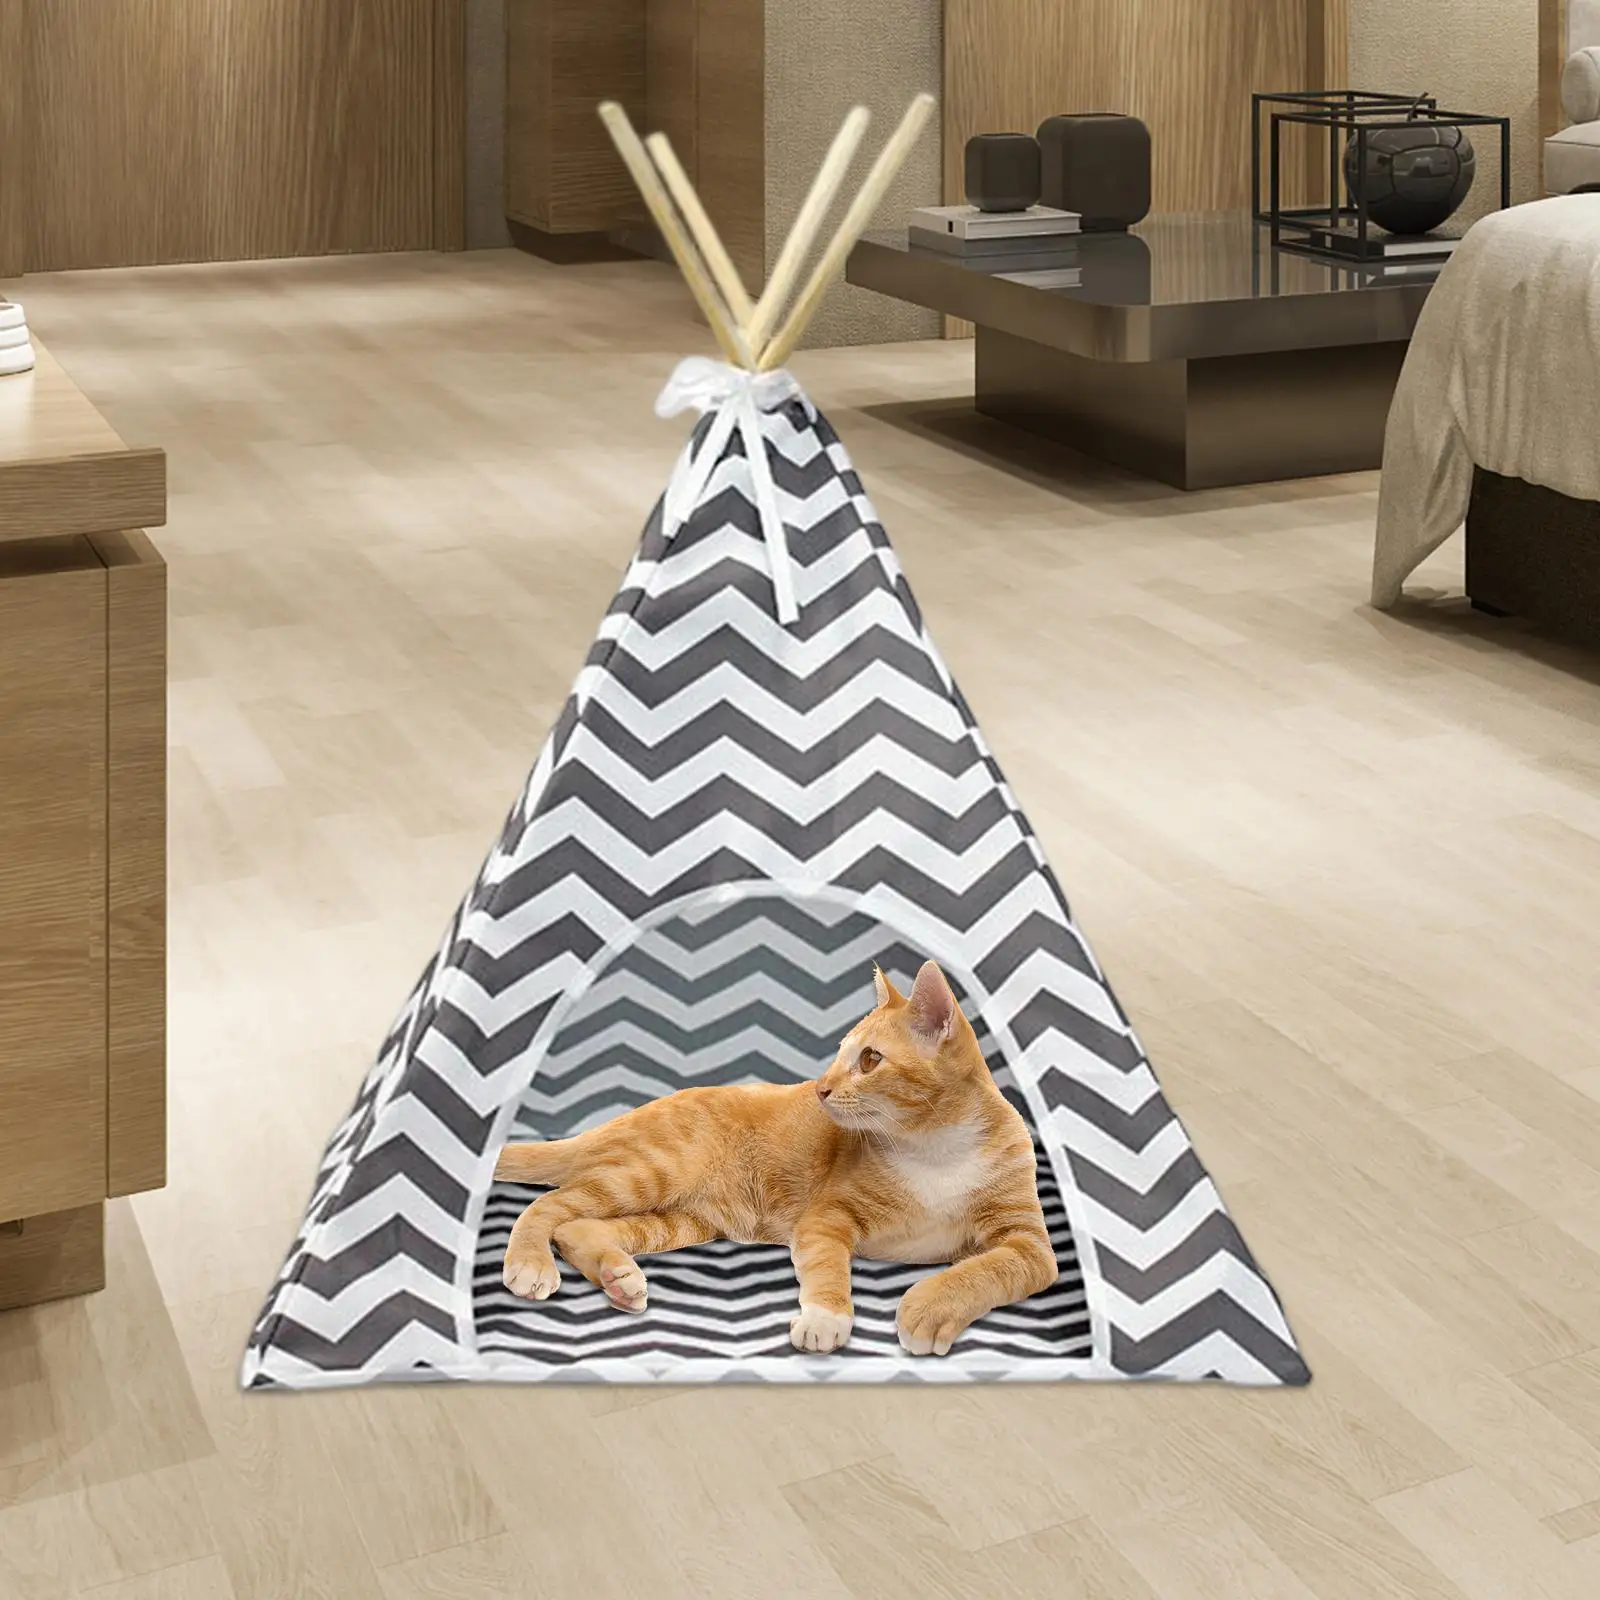 Pet Teepee Small Dog House Cat Tent Bed Mat Cushion Kennel for Puppy Indoor